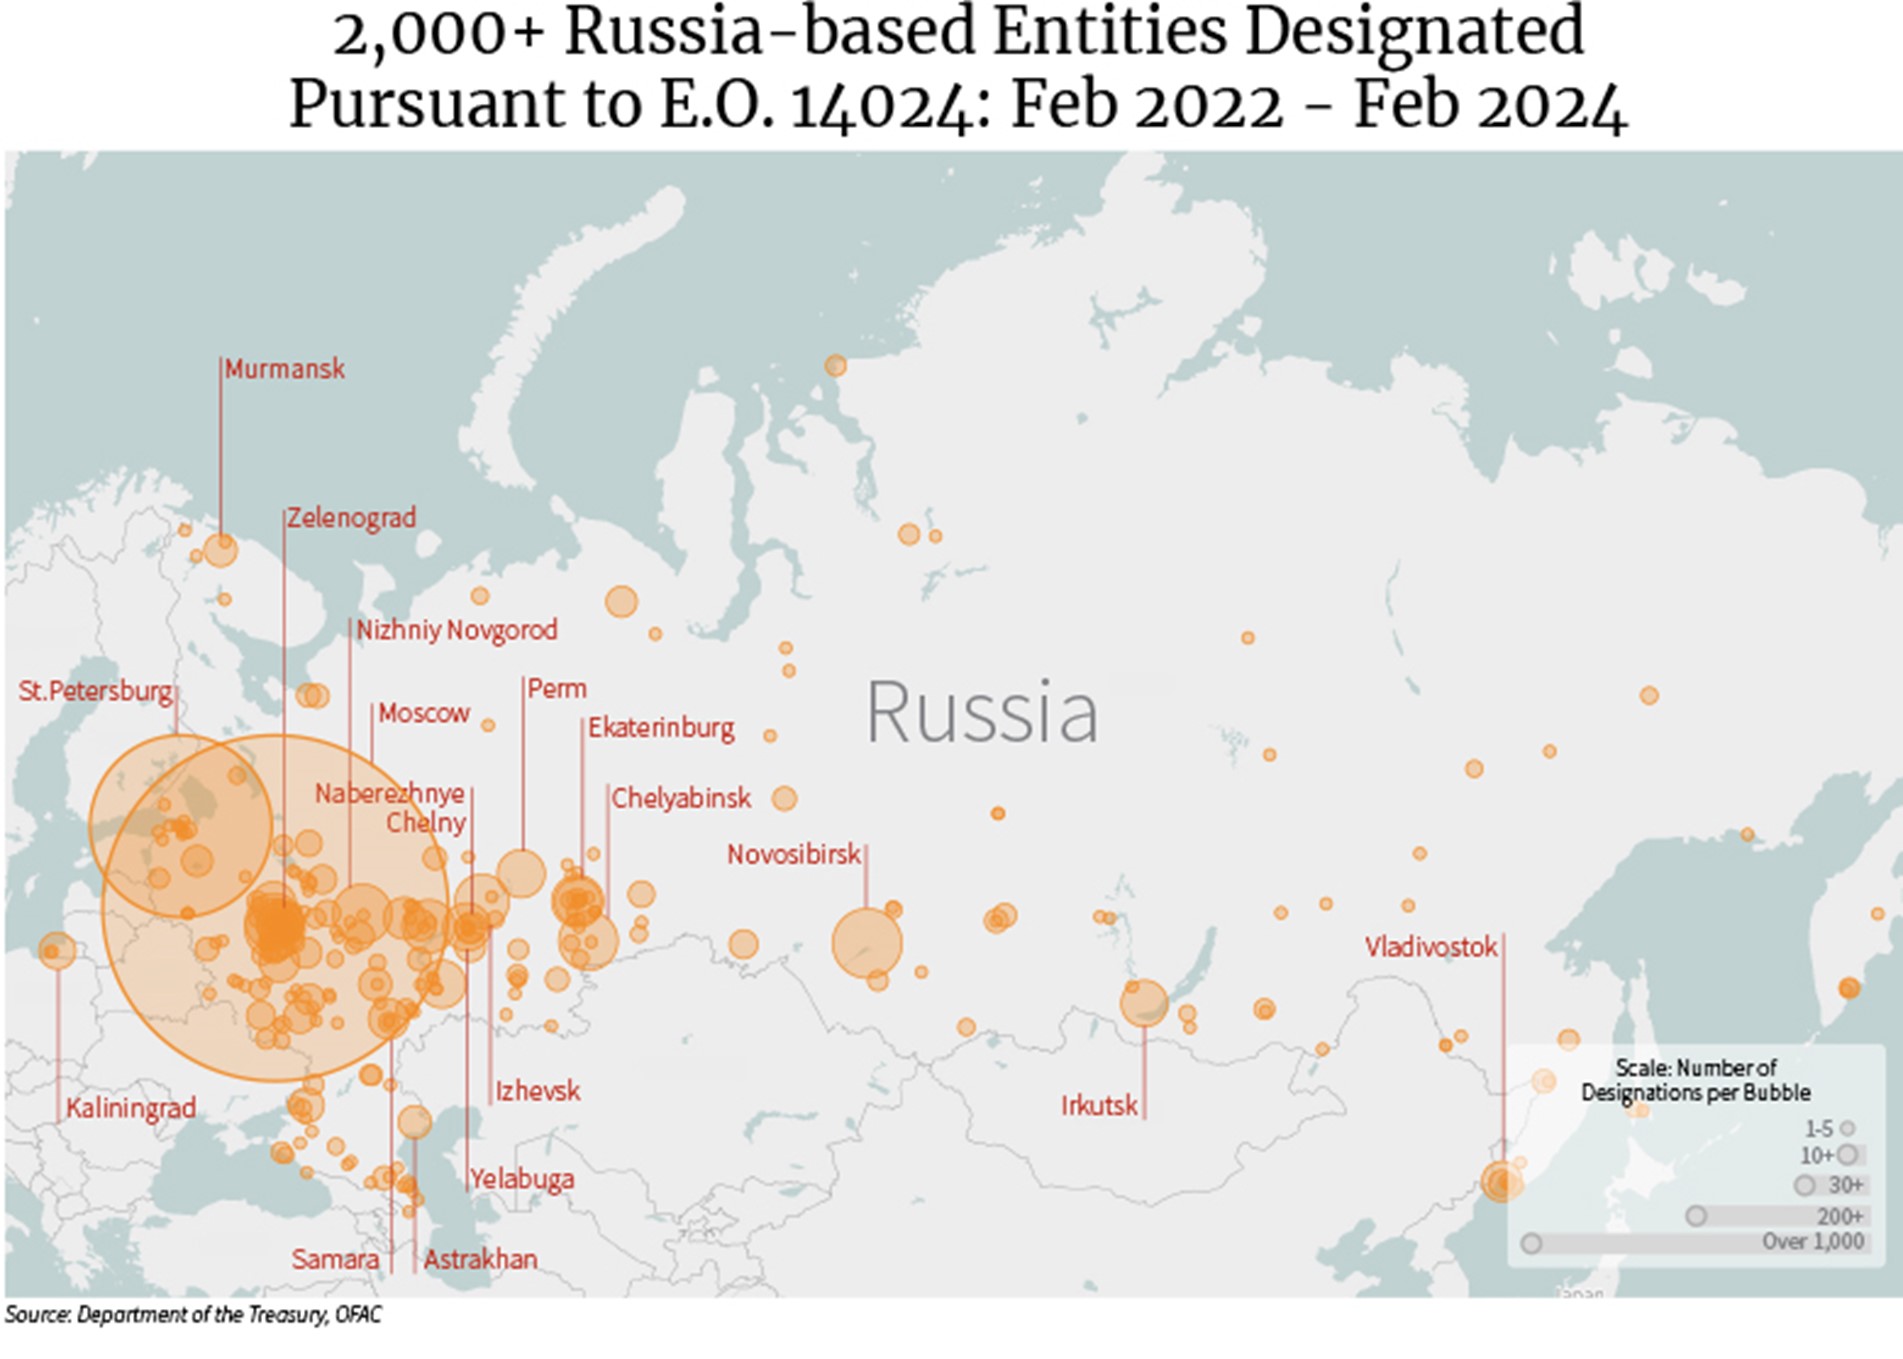 A map displaying the distribution of the 2,000+ Russia-based entities that have been designated pursuant to E.O. 14024 between February 2022 and February 2024